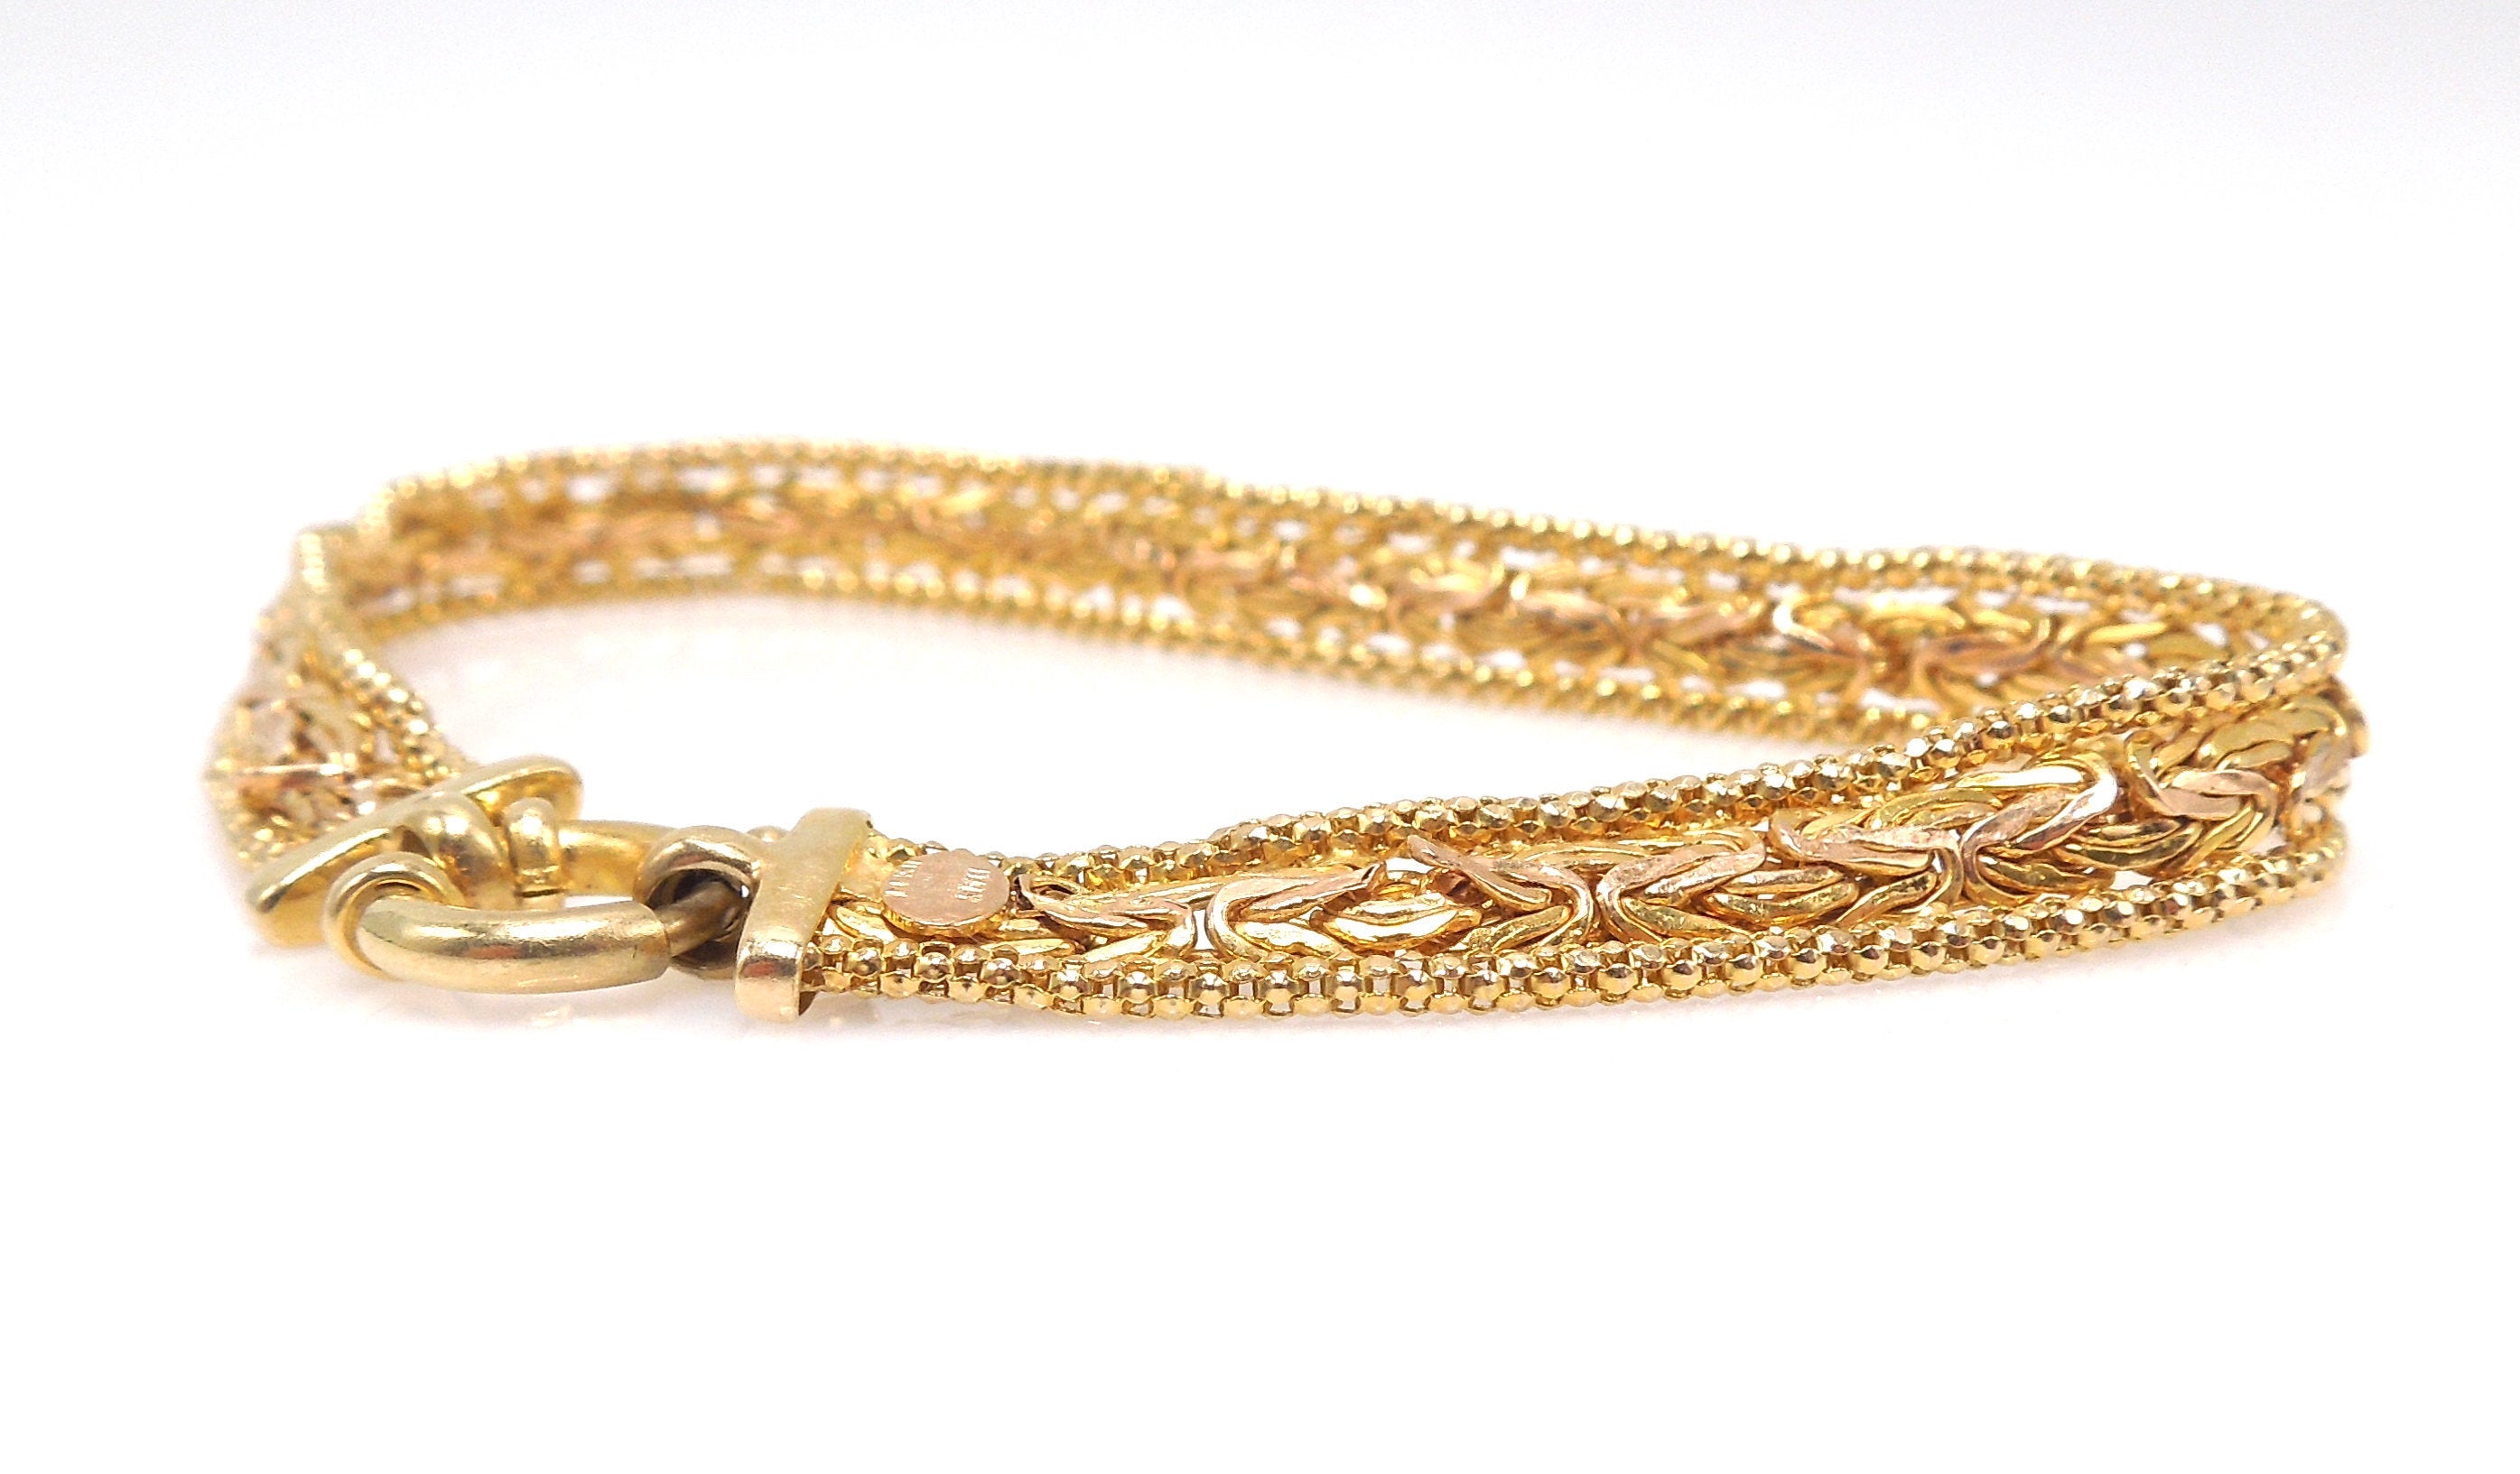 8 inch 14K Yellow and Rose Gold Woven Bicolor Bracelet